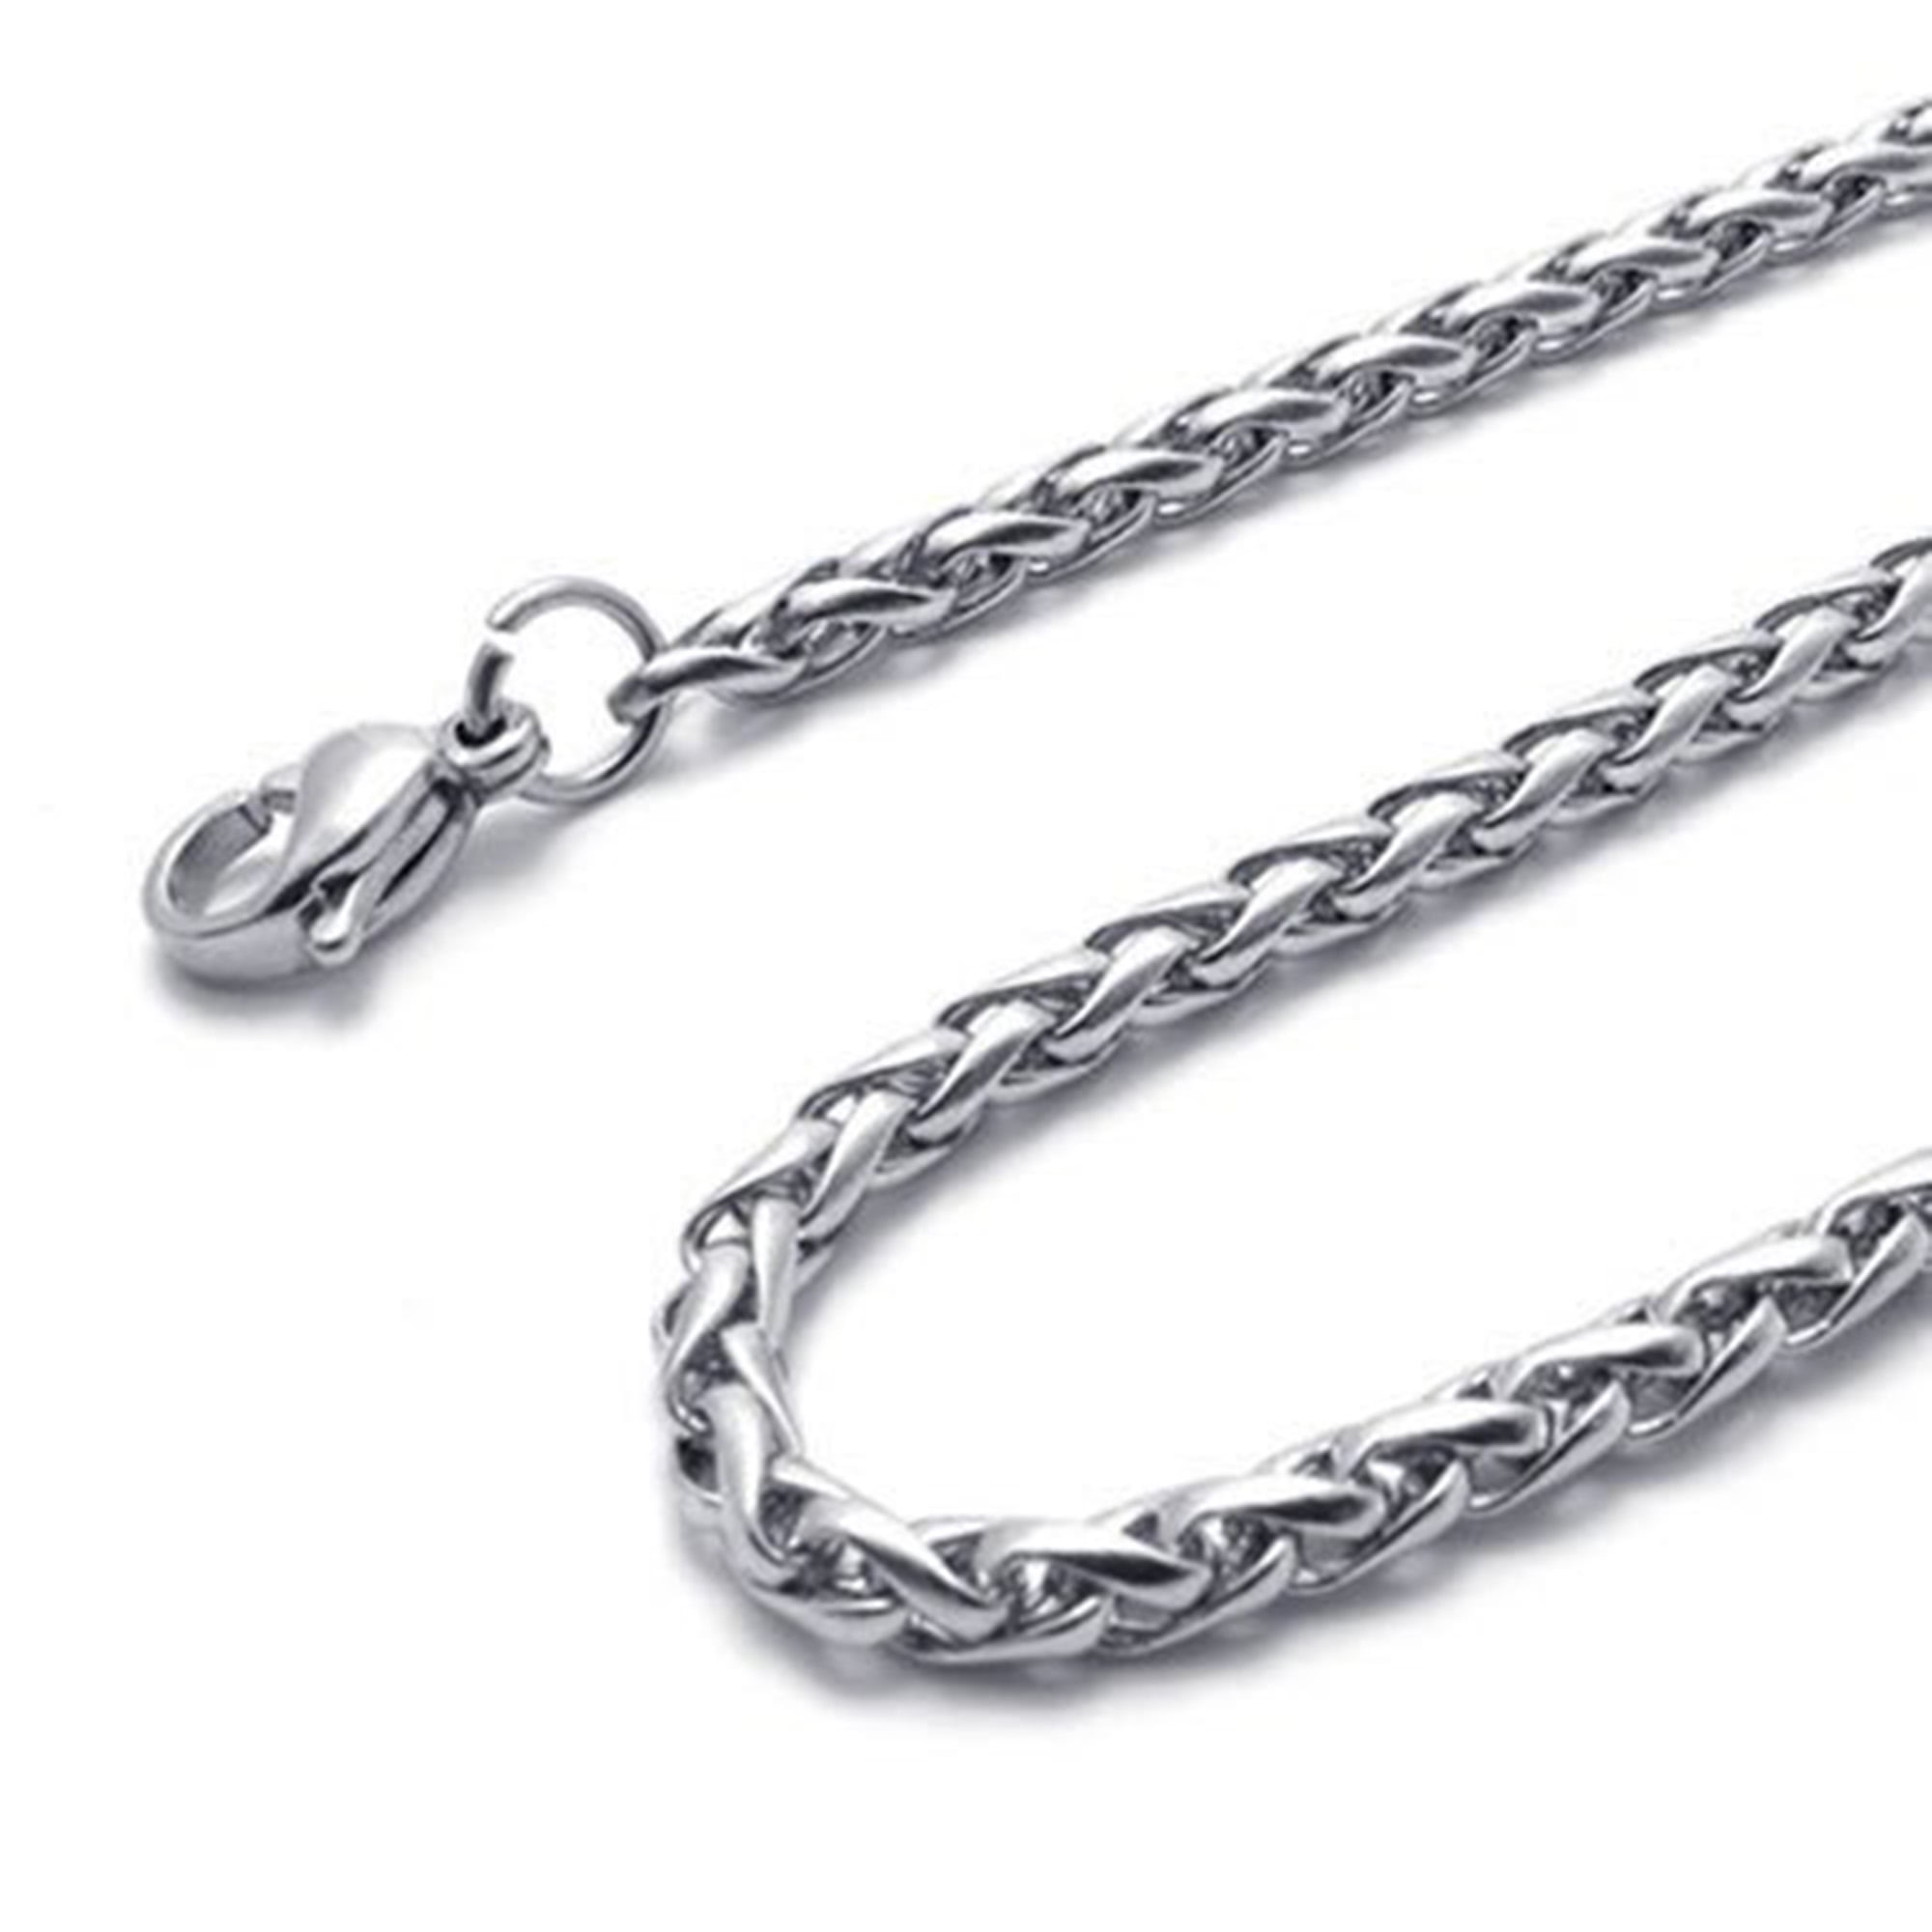 New Stainless Steel Silver Spiga Mens 3mm Chain Womens Necklace Sizes 16" 40"